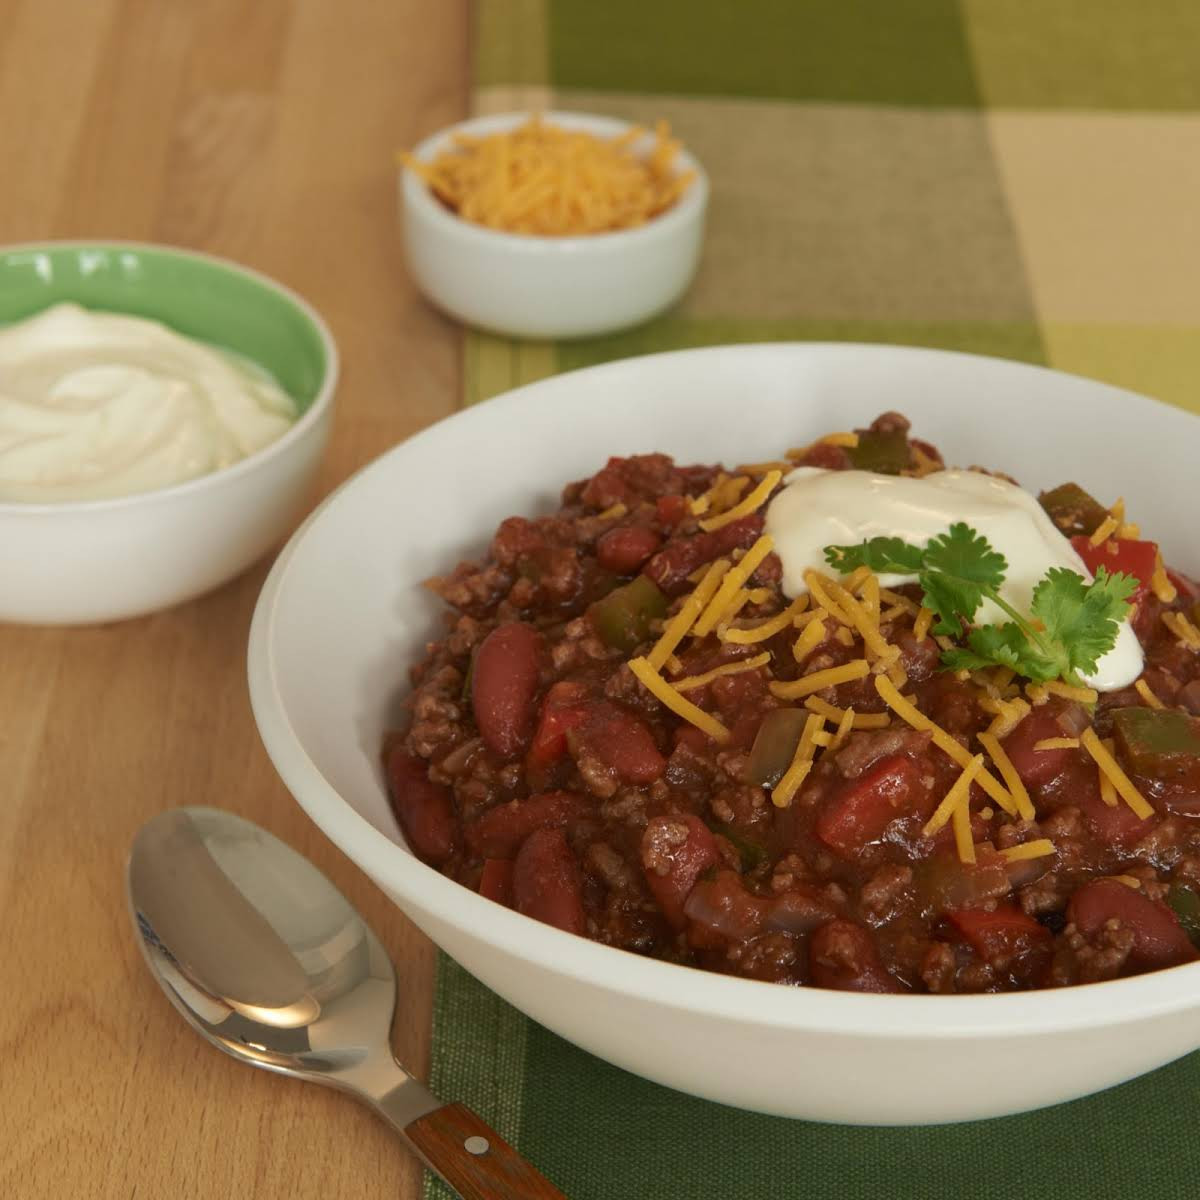 Chili Recipe With Beef Broth
 10 Best Beef Broth Chili Recipes